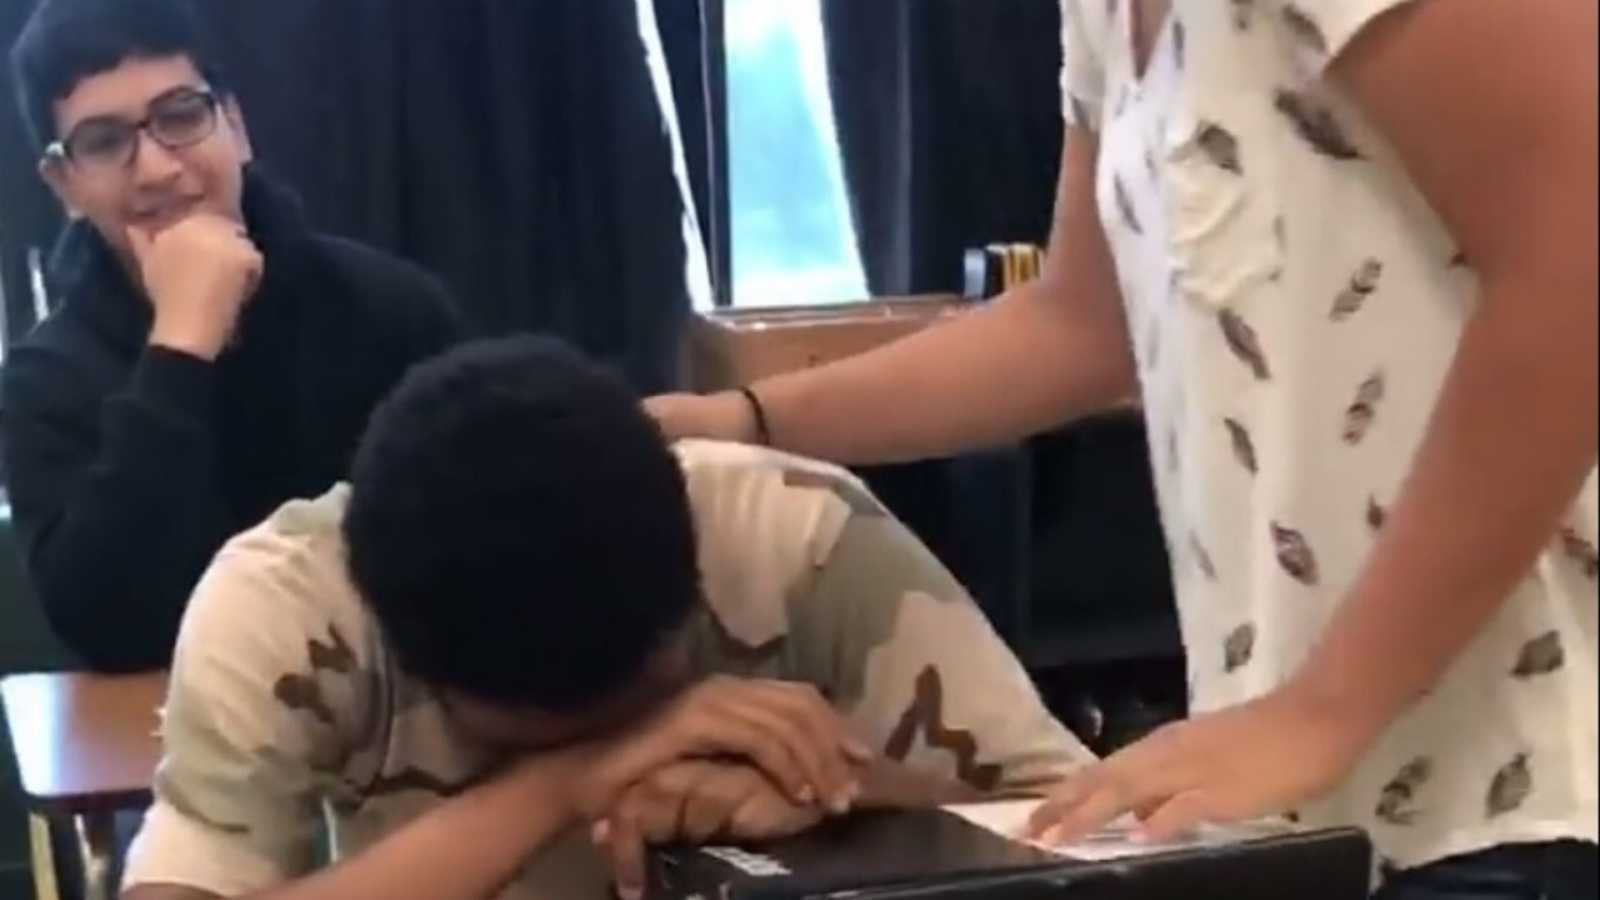 Student crying with head down on desk